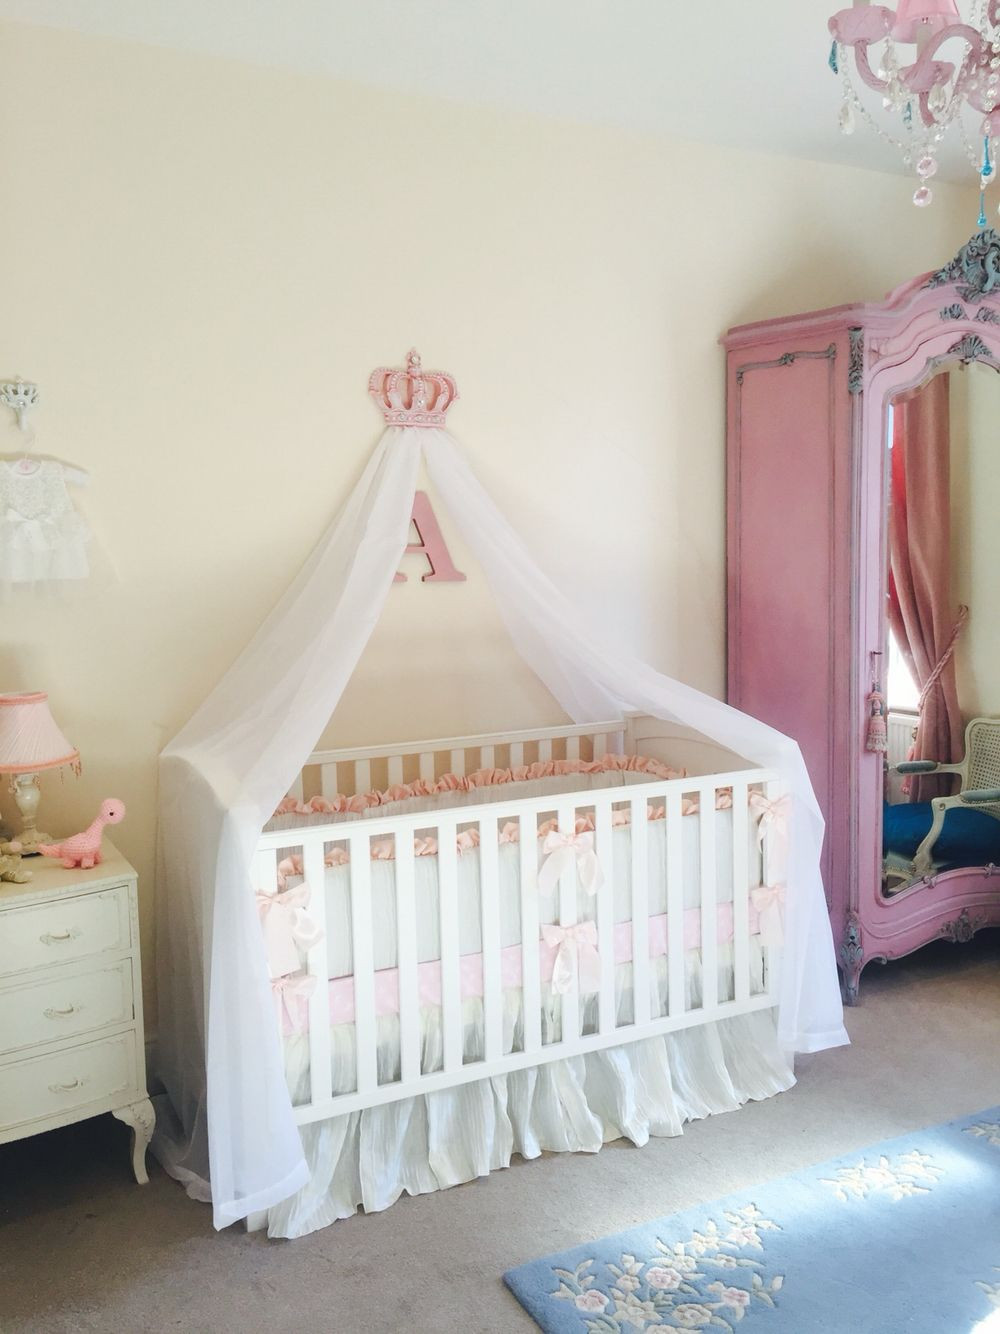 Crown Decor For Baby Room
 Girls pink nursery cot canopy white bed princess crown